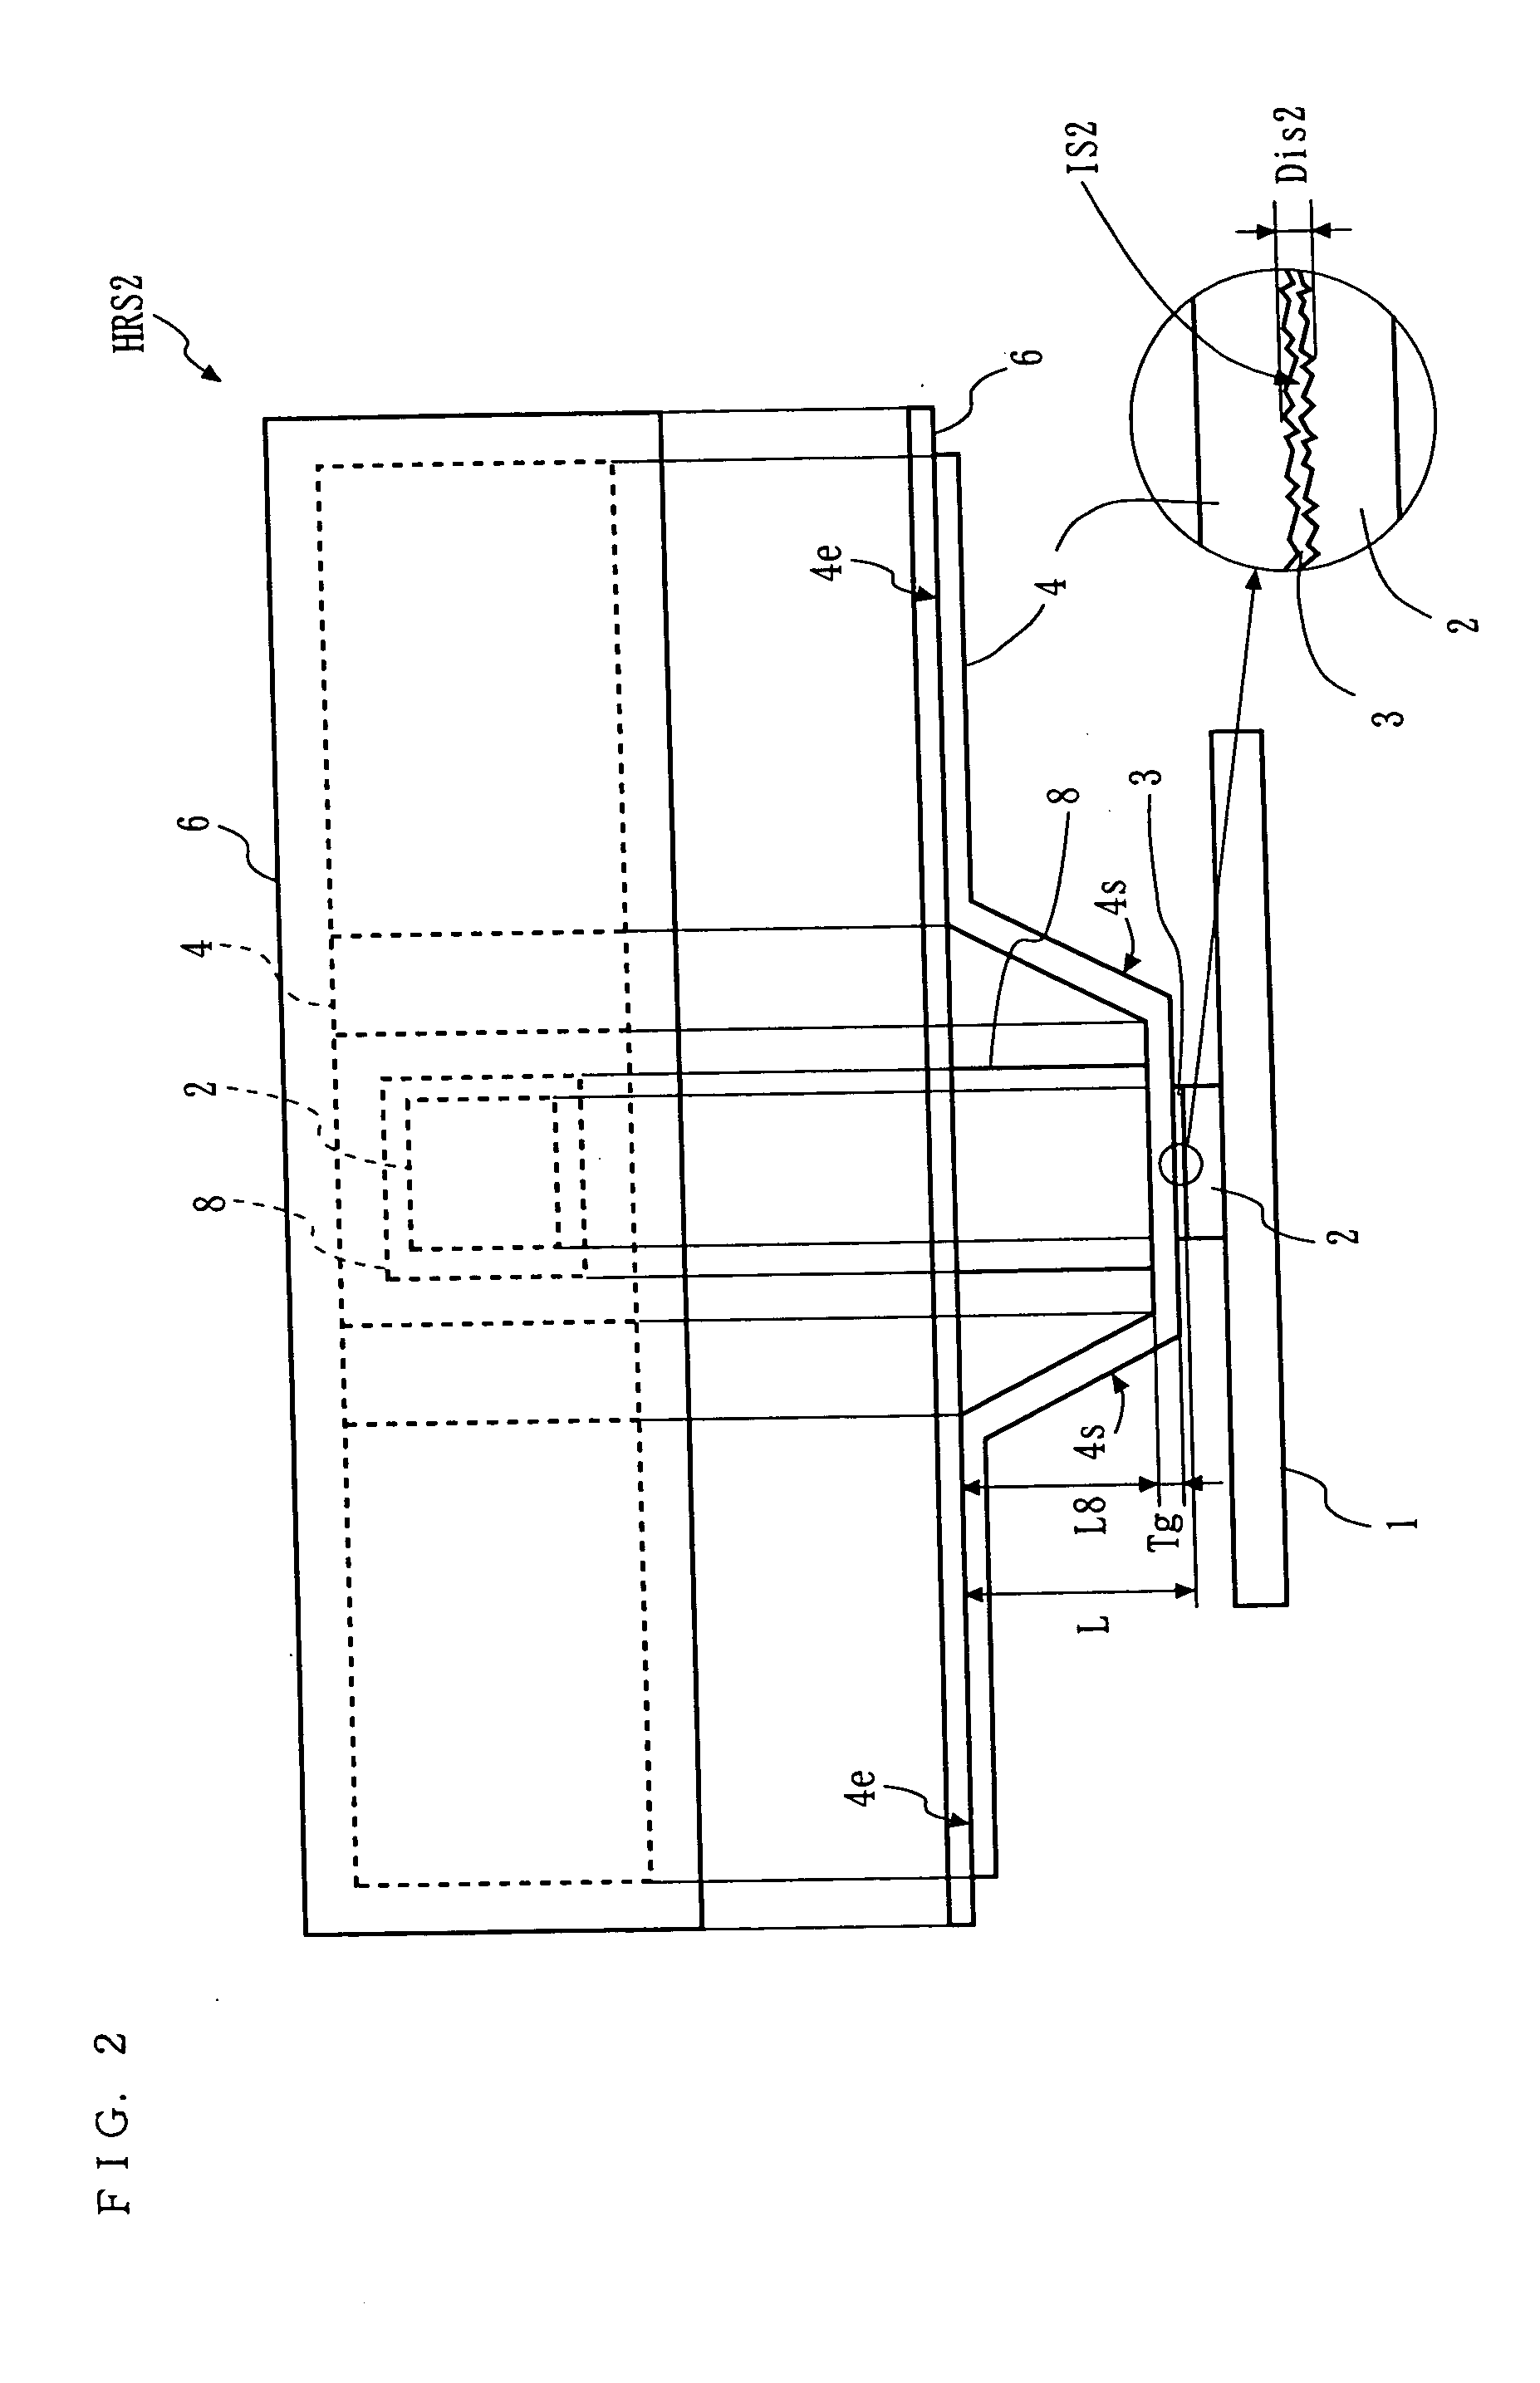 Heat-radiating structure of electronic apparatus